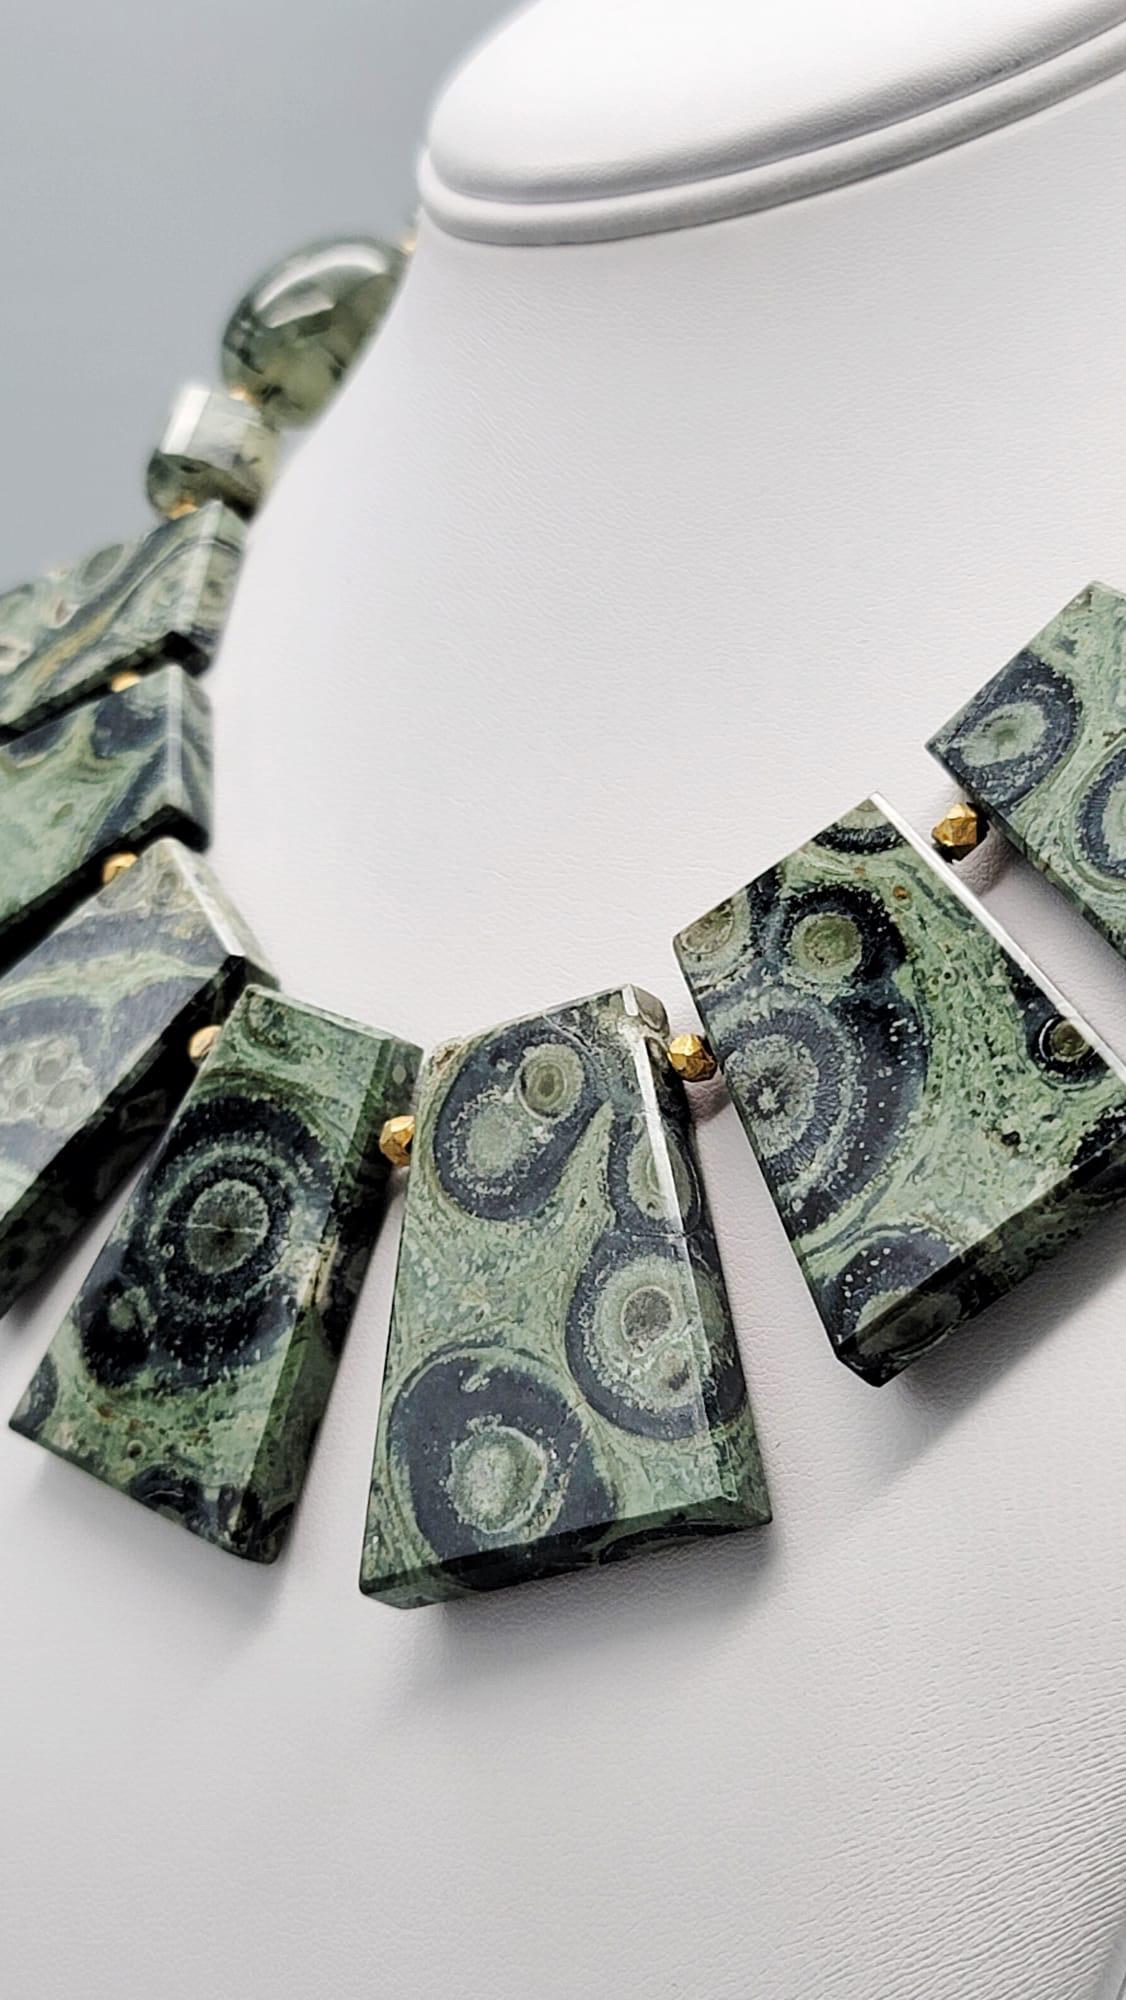 One-of-a-Kind

Kambaba jasper is one of the oldest materials in our stone lexicon. This interesting green and black stone cut into a rhomboid shape permit the dramatic collar to lie flat. the polished translucent rutilated green Quartz translucent